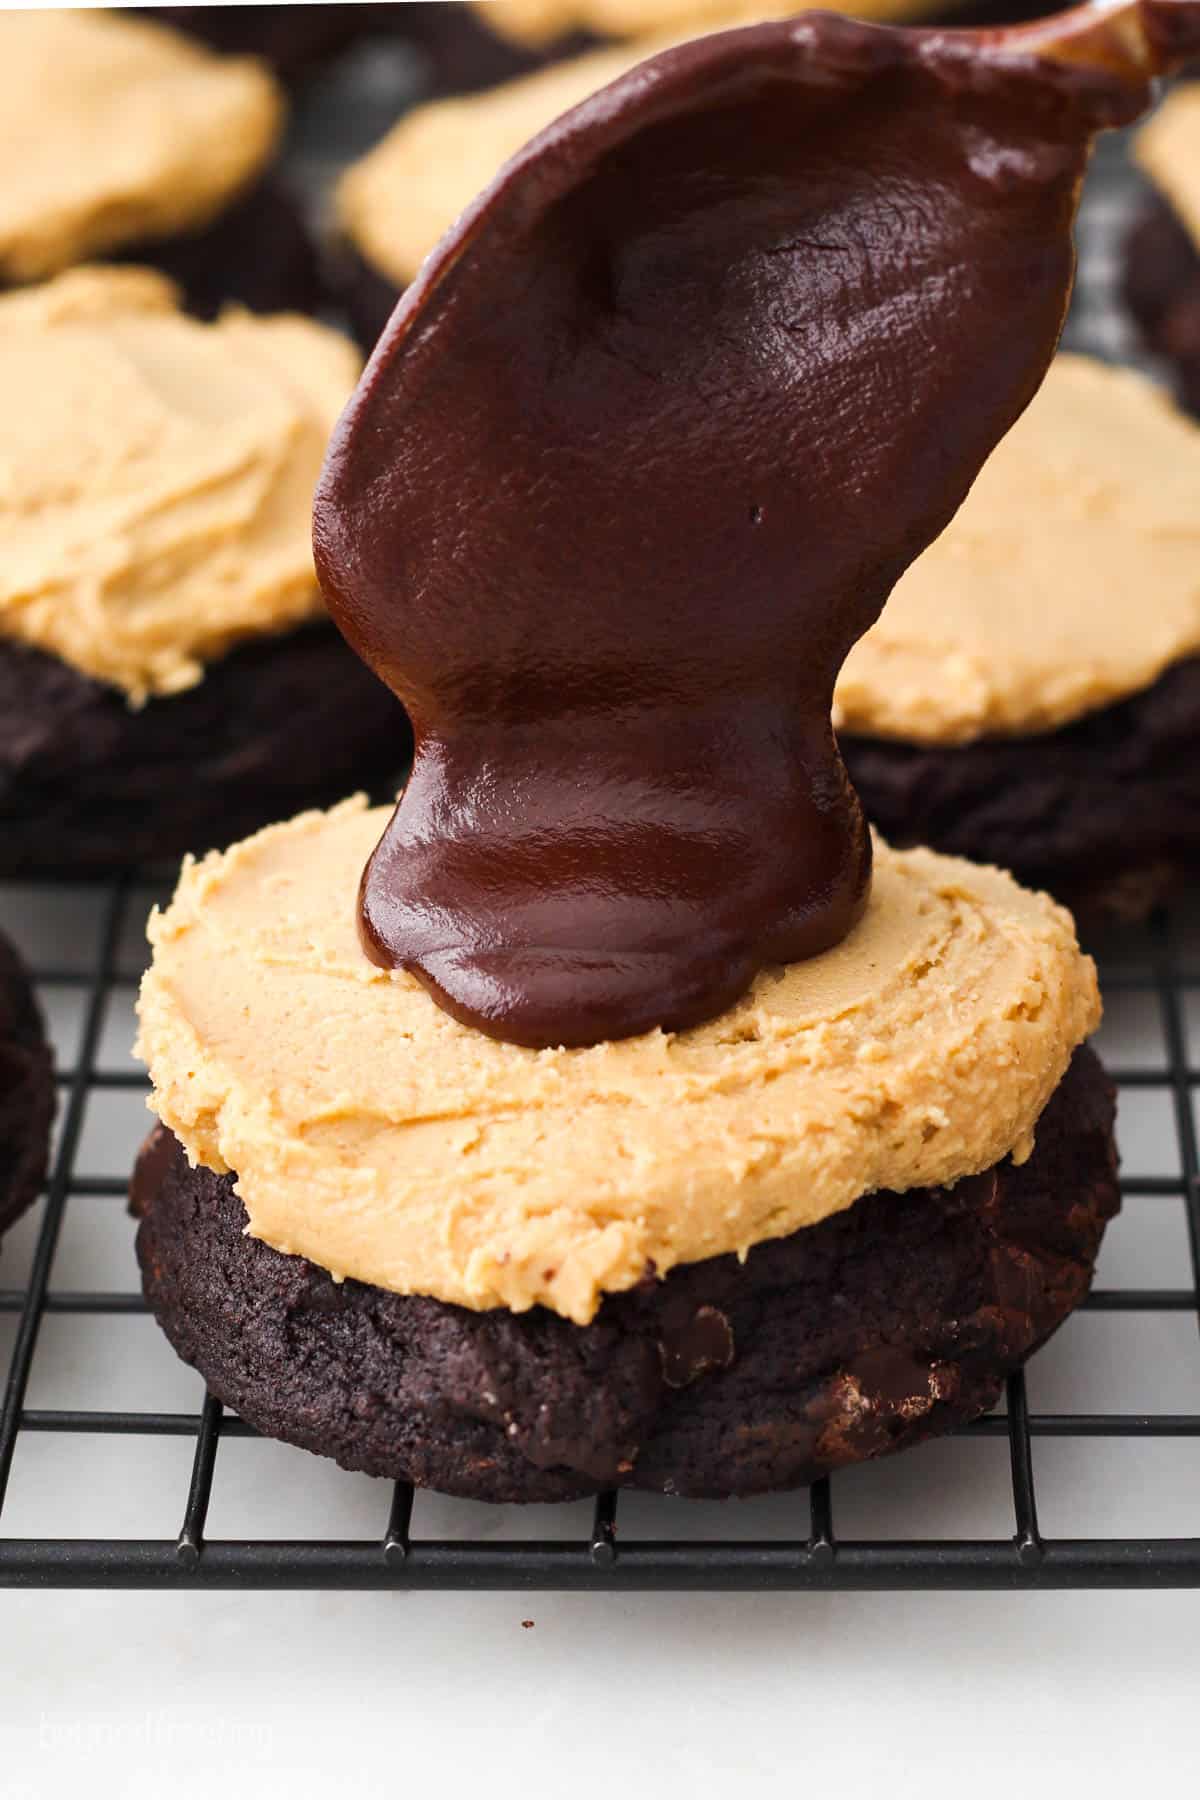 Chocolate ganache being spooned on top of a layer of peanut butter filling